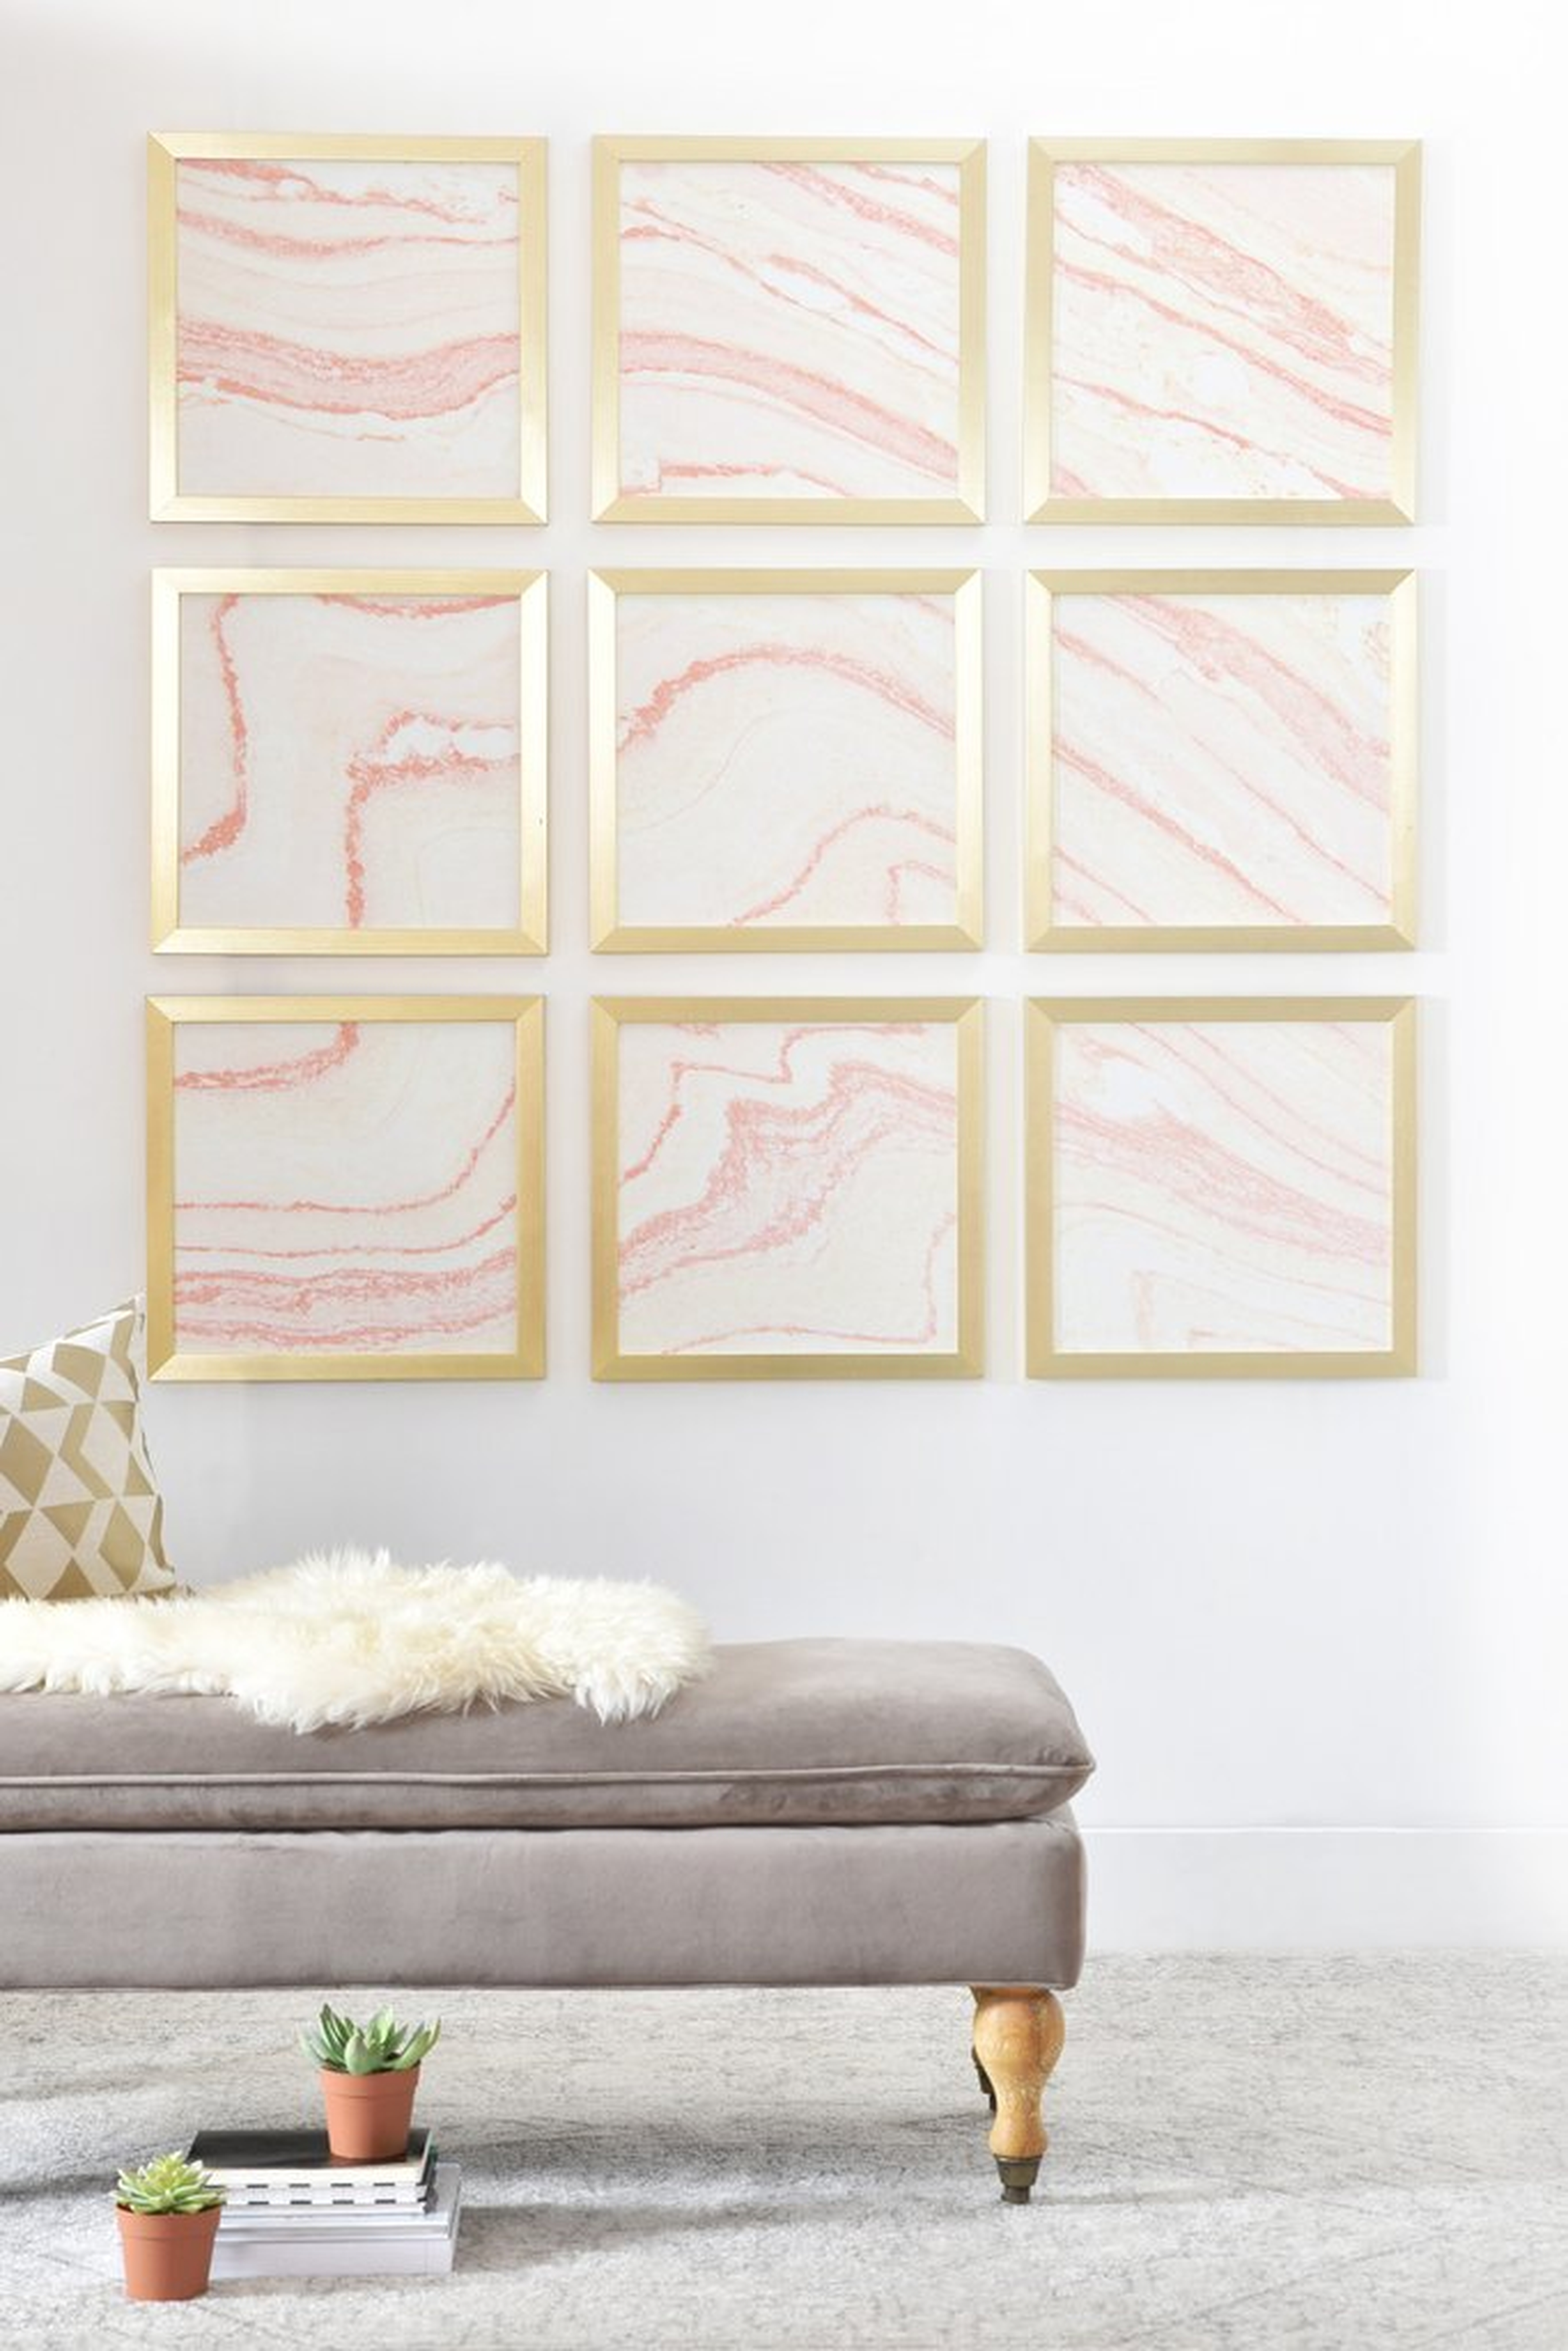 BLUSH MARBLE Wall Mural - 3' x 3' - Basic Silver Frame without - Wander Print Co.